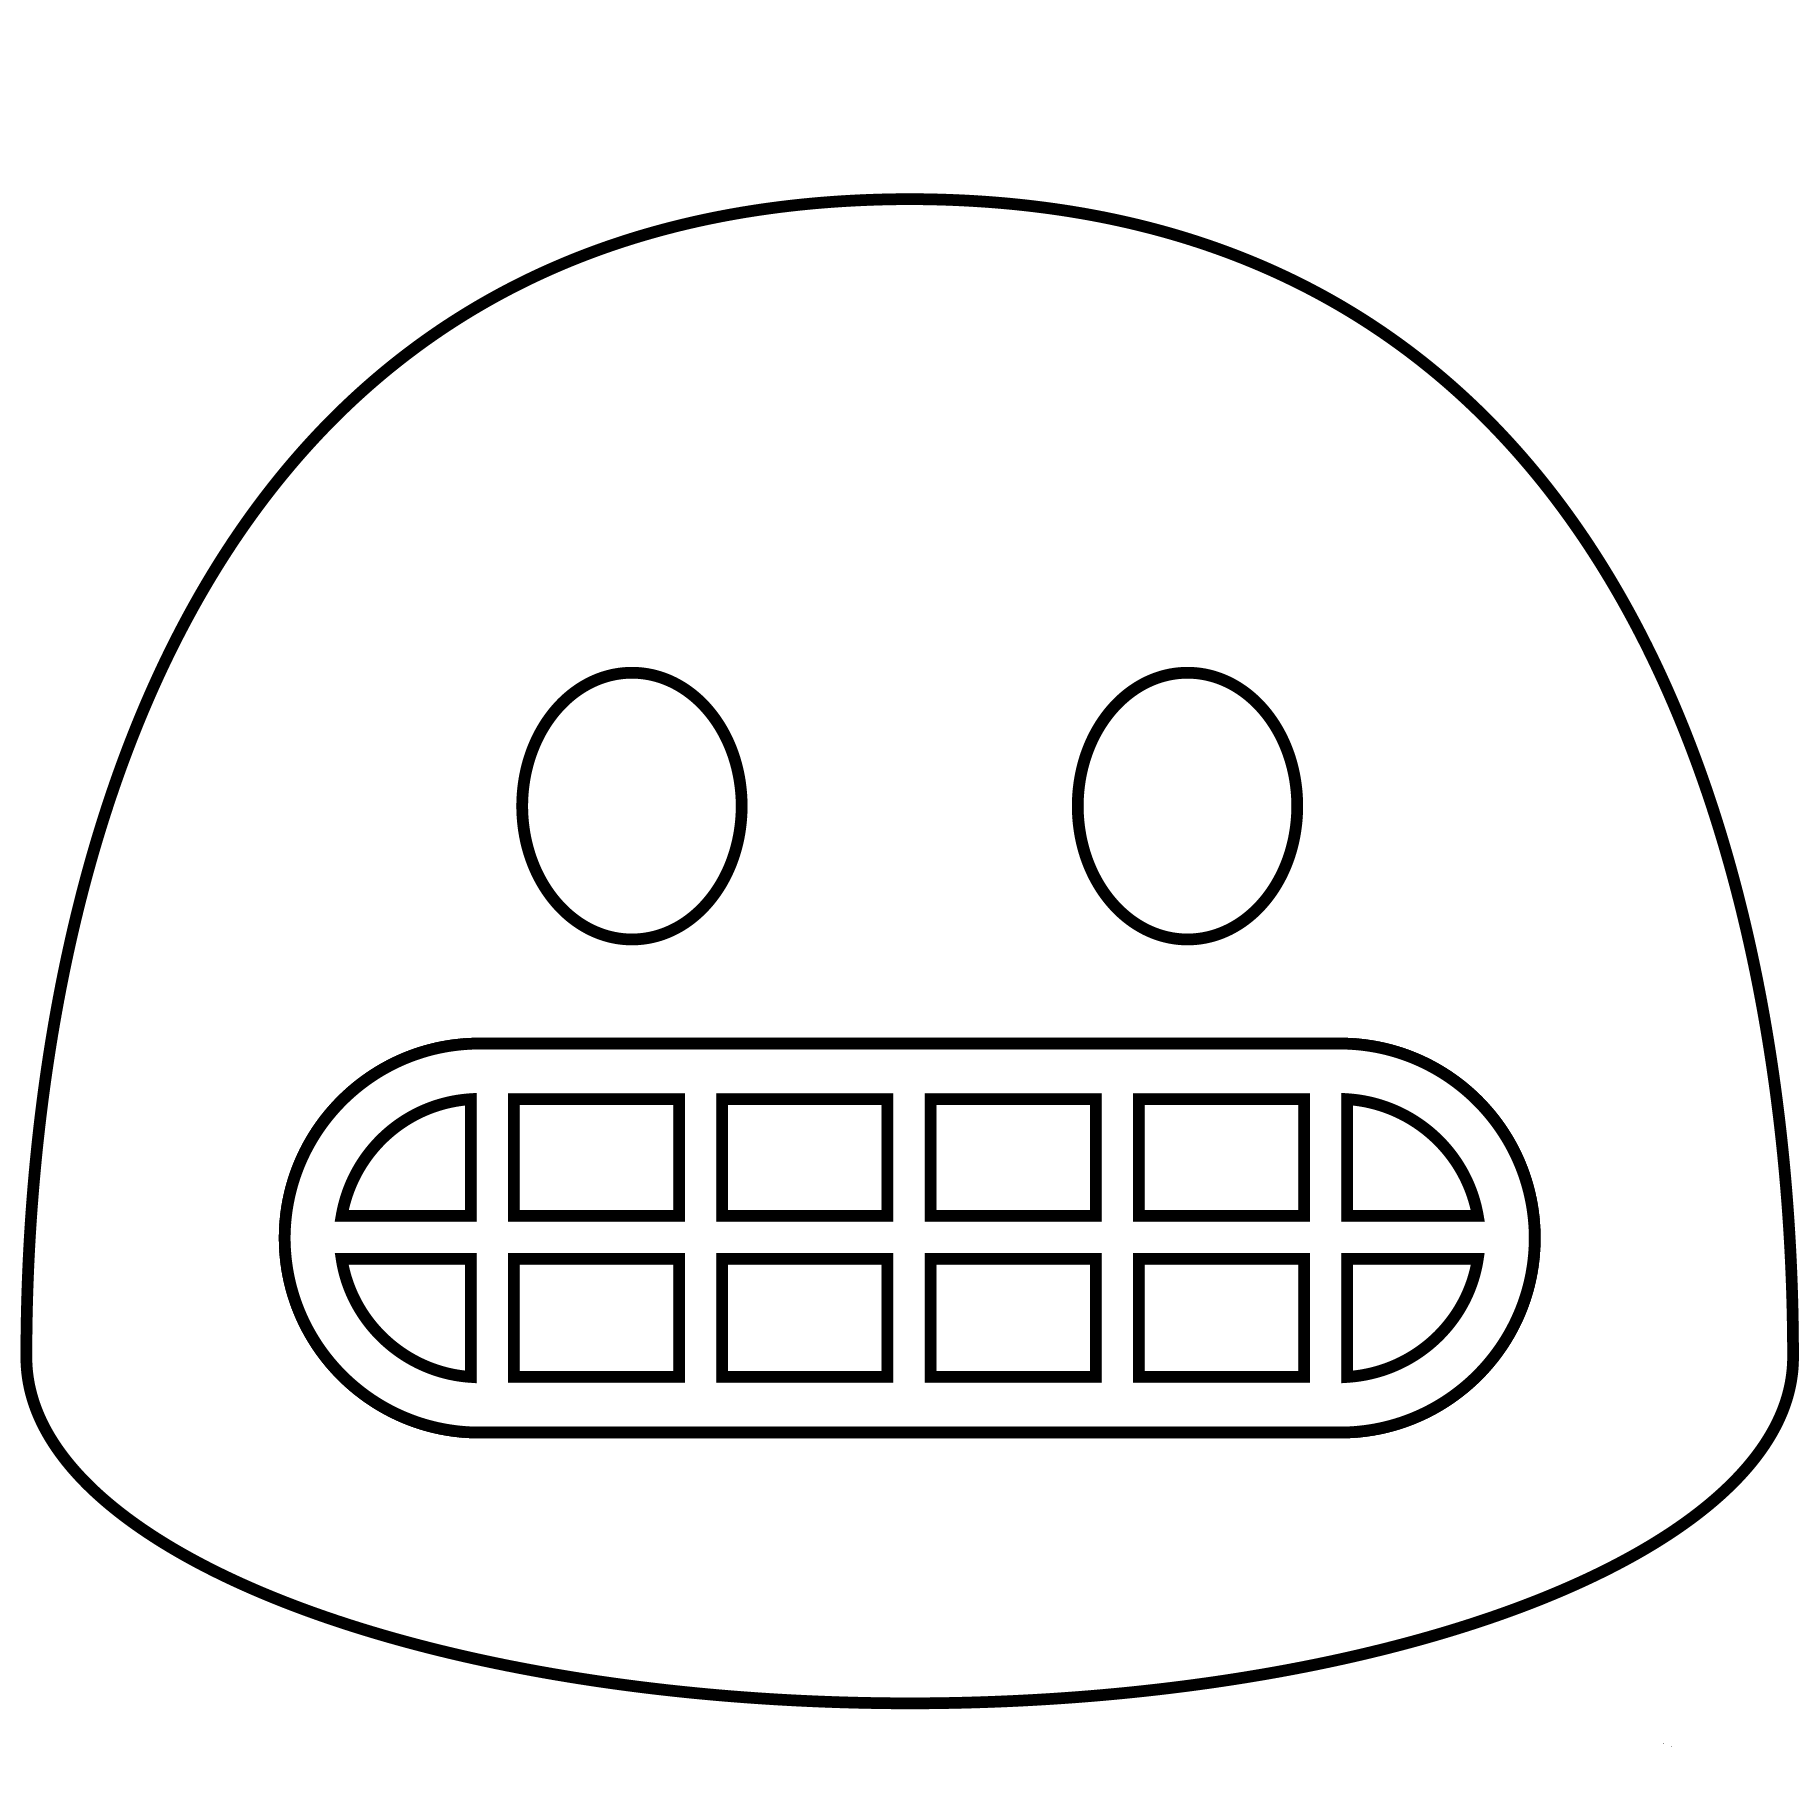 Grimacing Face Emoji coloring page ColouringPages